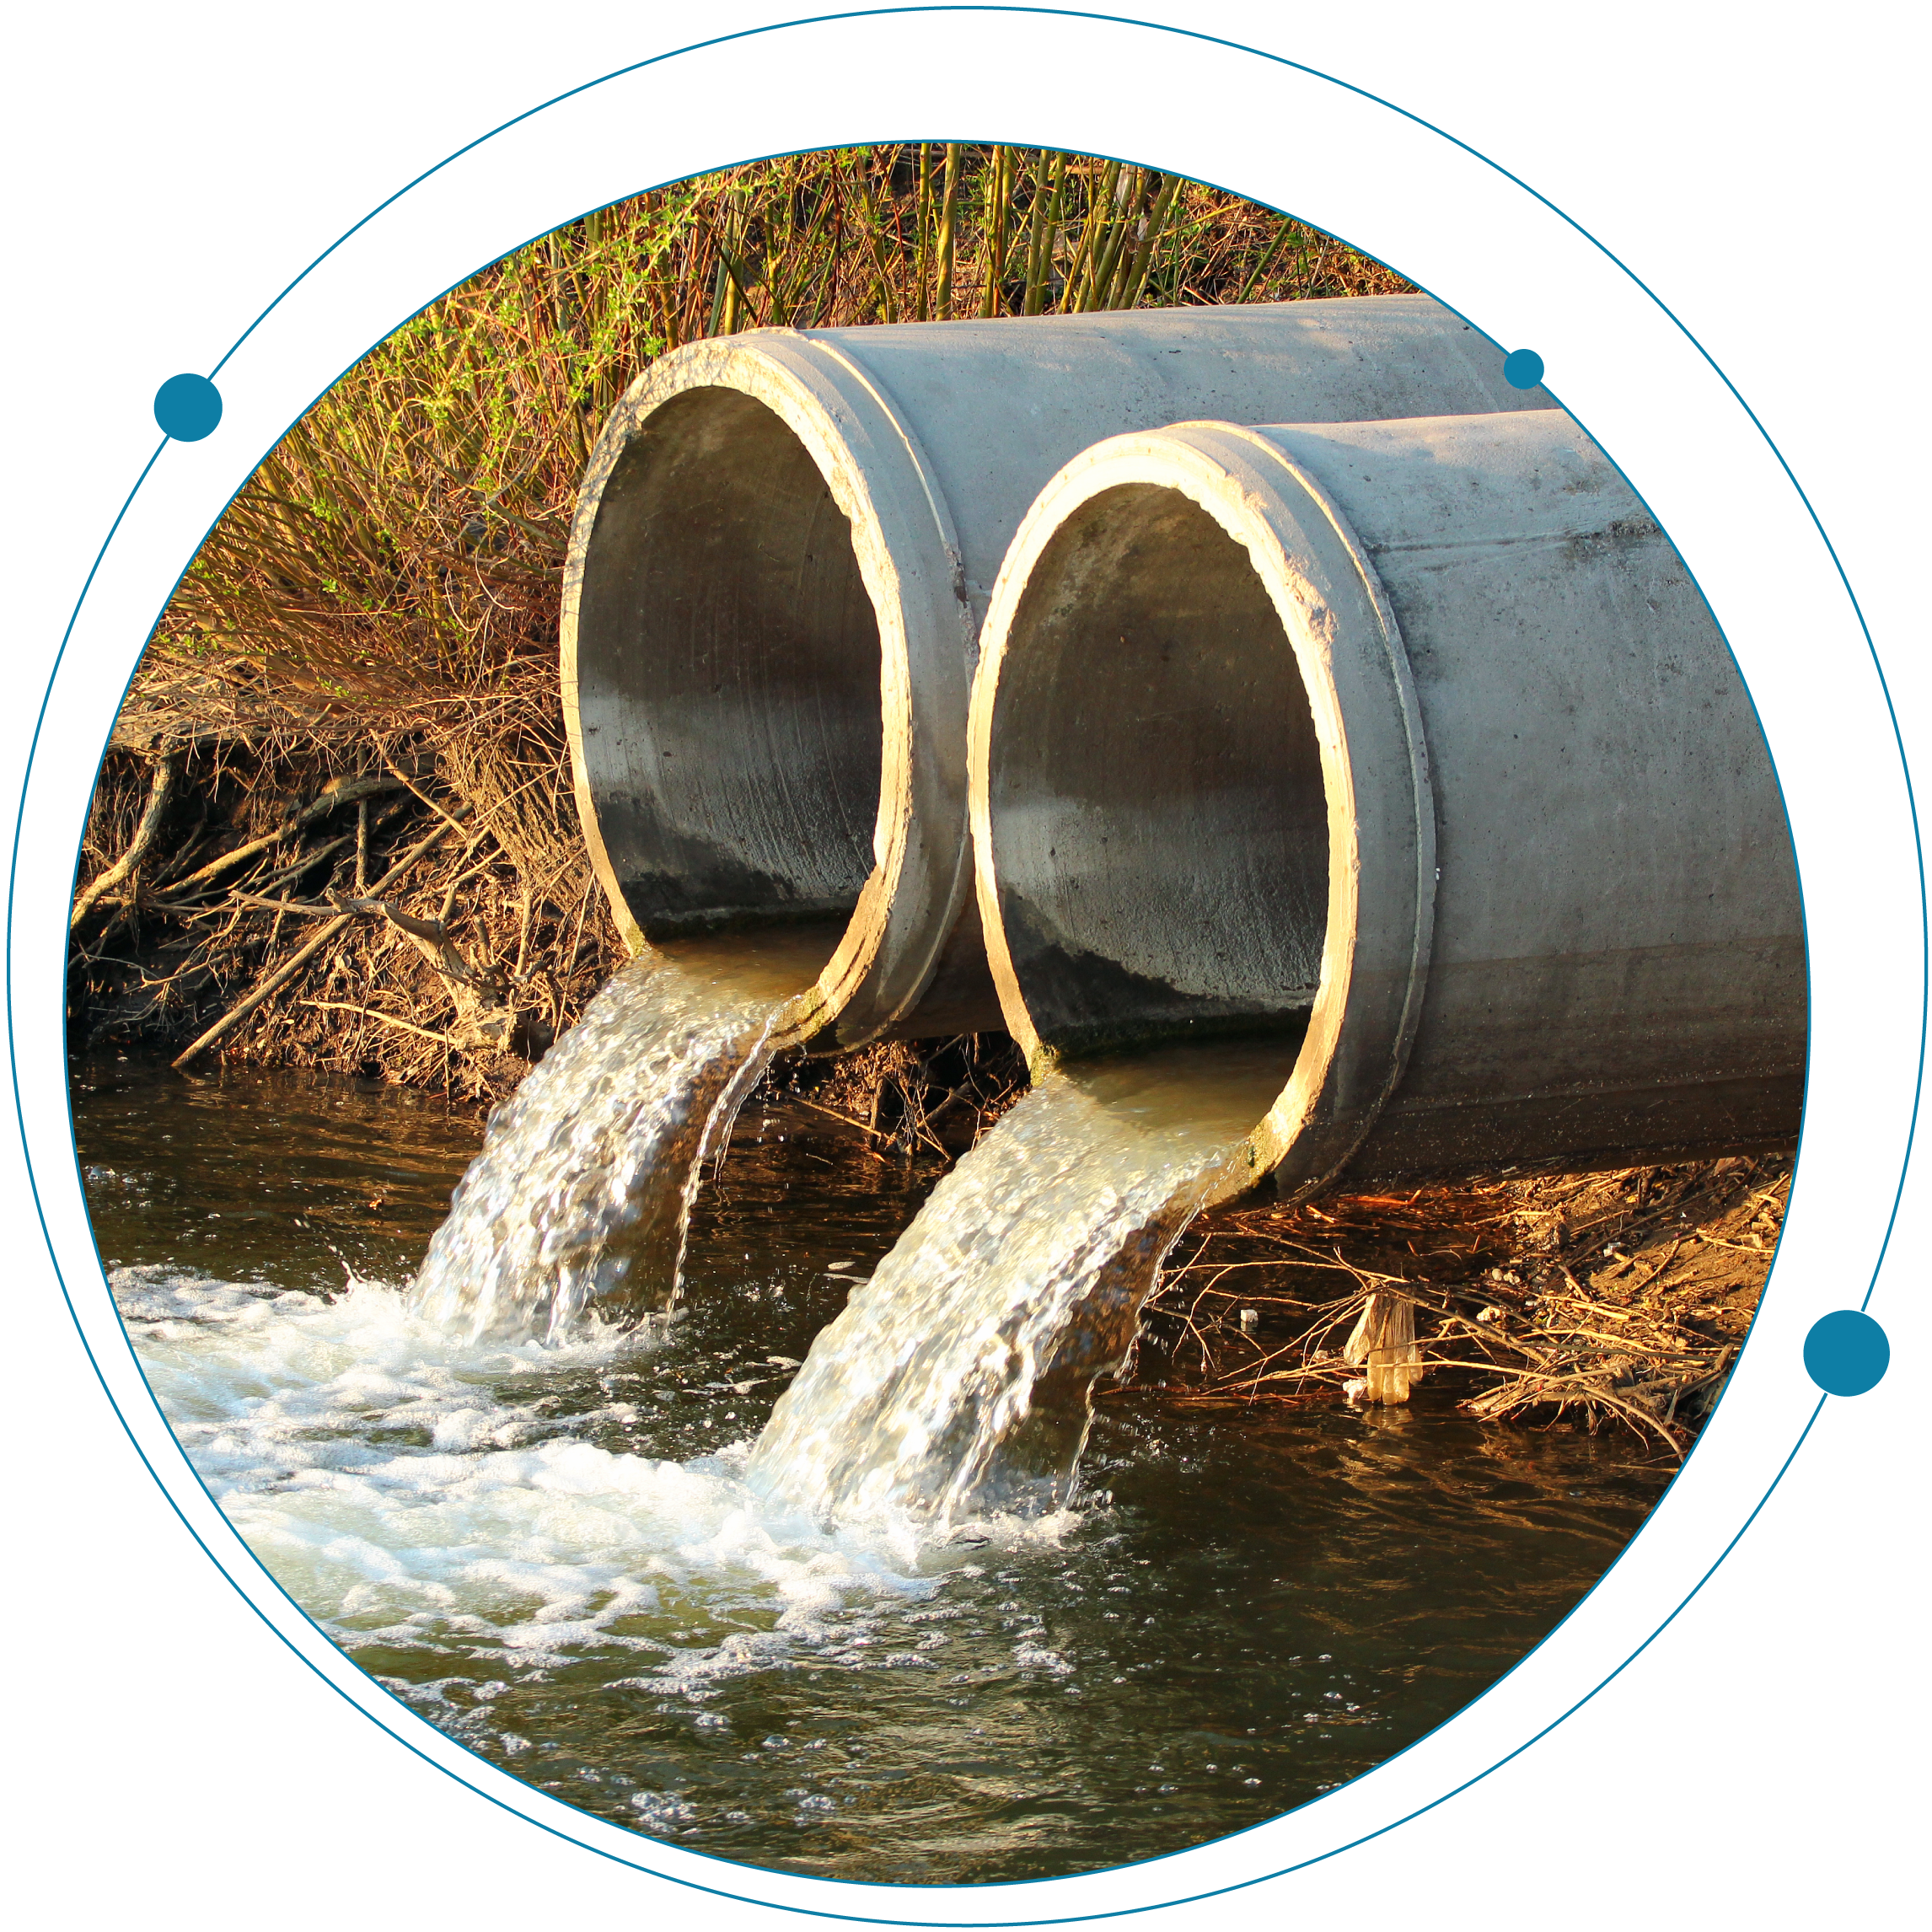 Using wastewater monitoring to assess exposure to PFAS